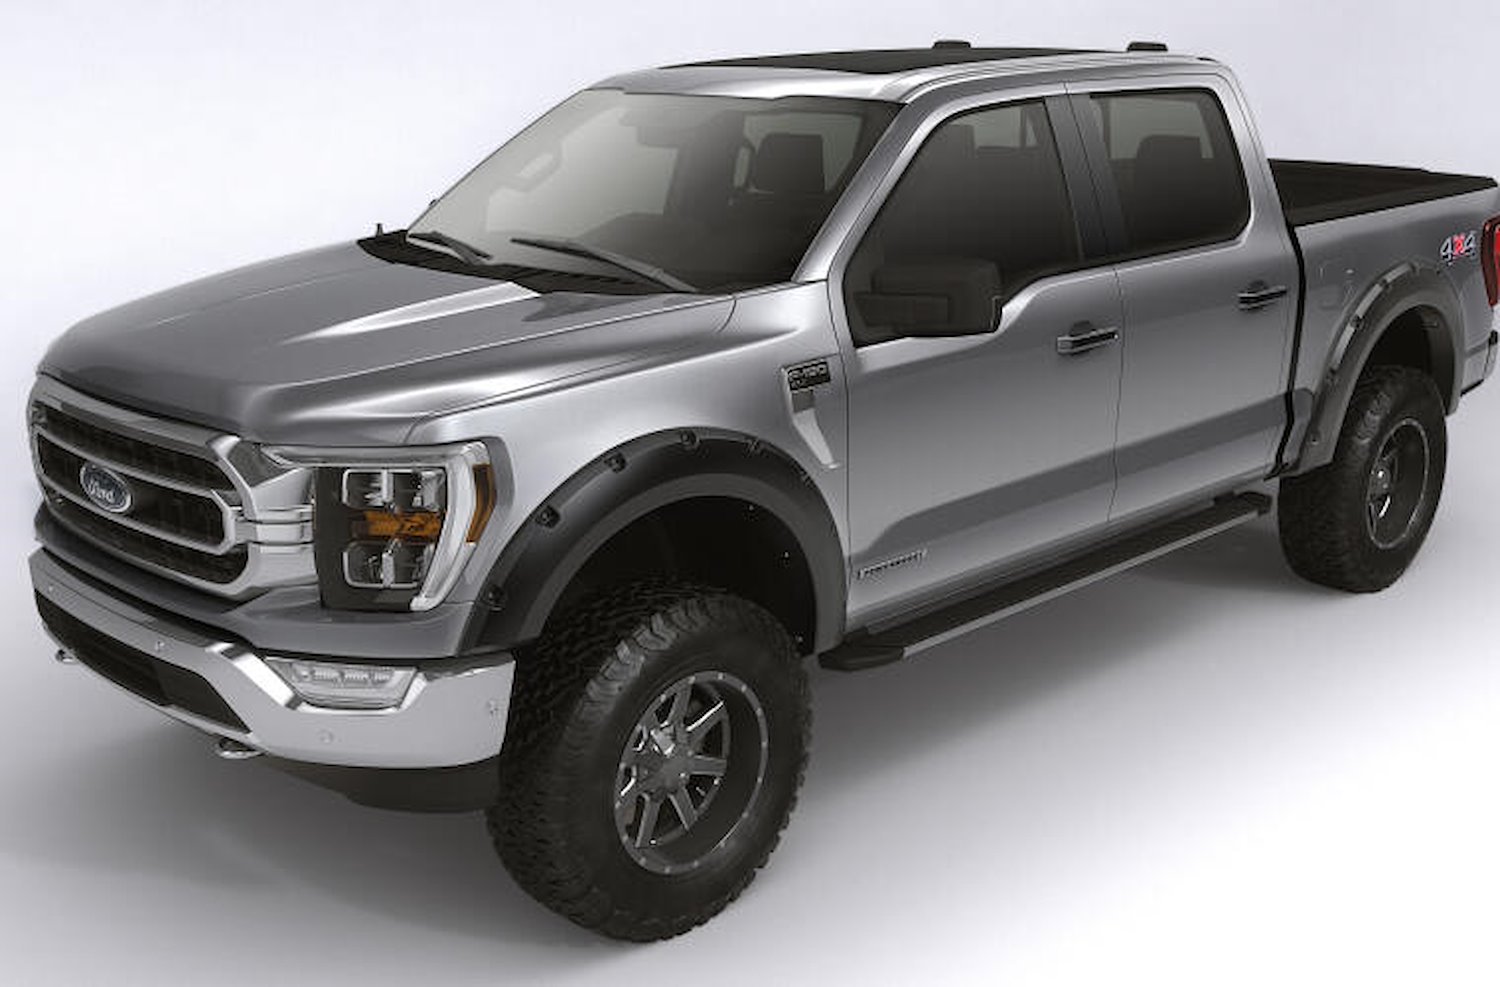 Forge Front/Rear Fender Flares for Late-Model Ford F-250,